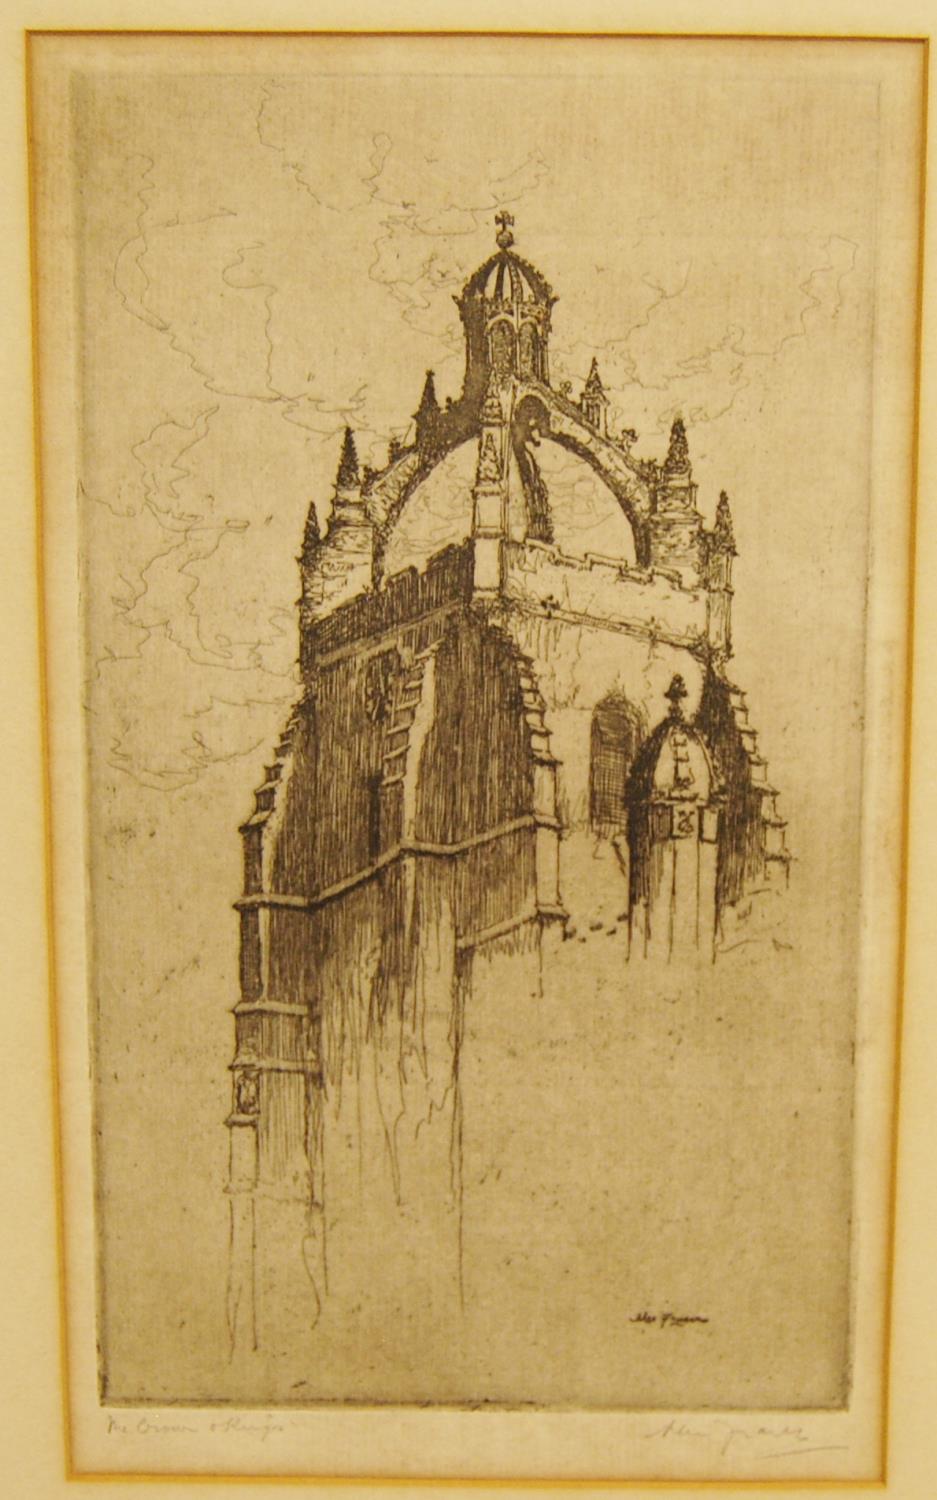 Assorted etchings, aquatints and prints including James Gibbs, architectural designs etc. - Image 9 of 9